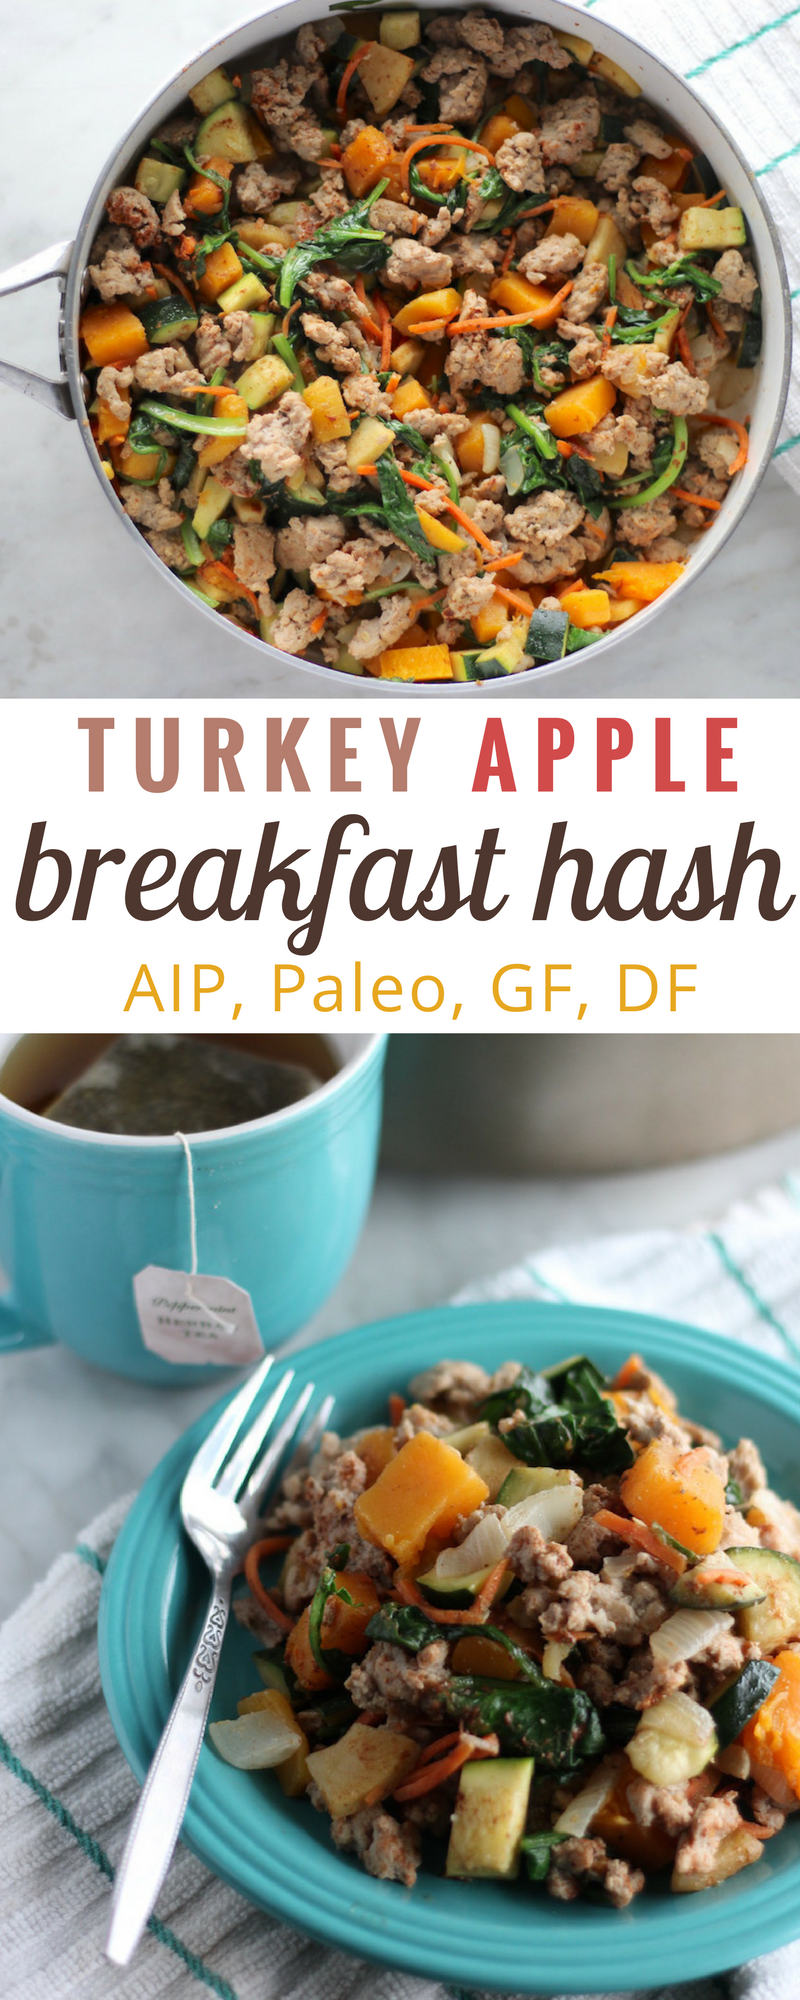 Turkey Apple Breakfast Hash (AIP) – an AIP, paleo hash that is delicious, healthy, and will provide breakfast for the whole week!